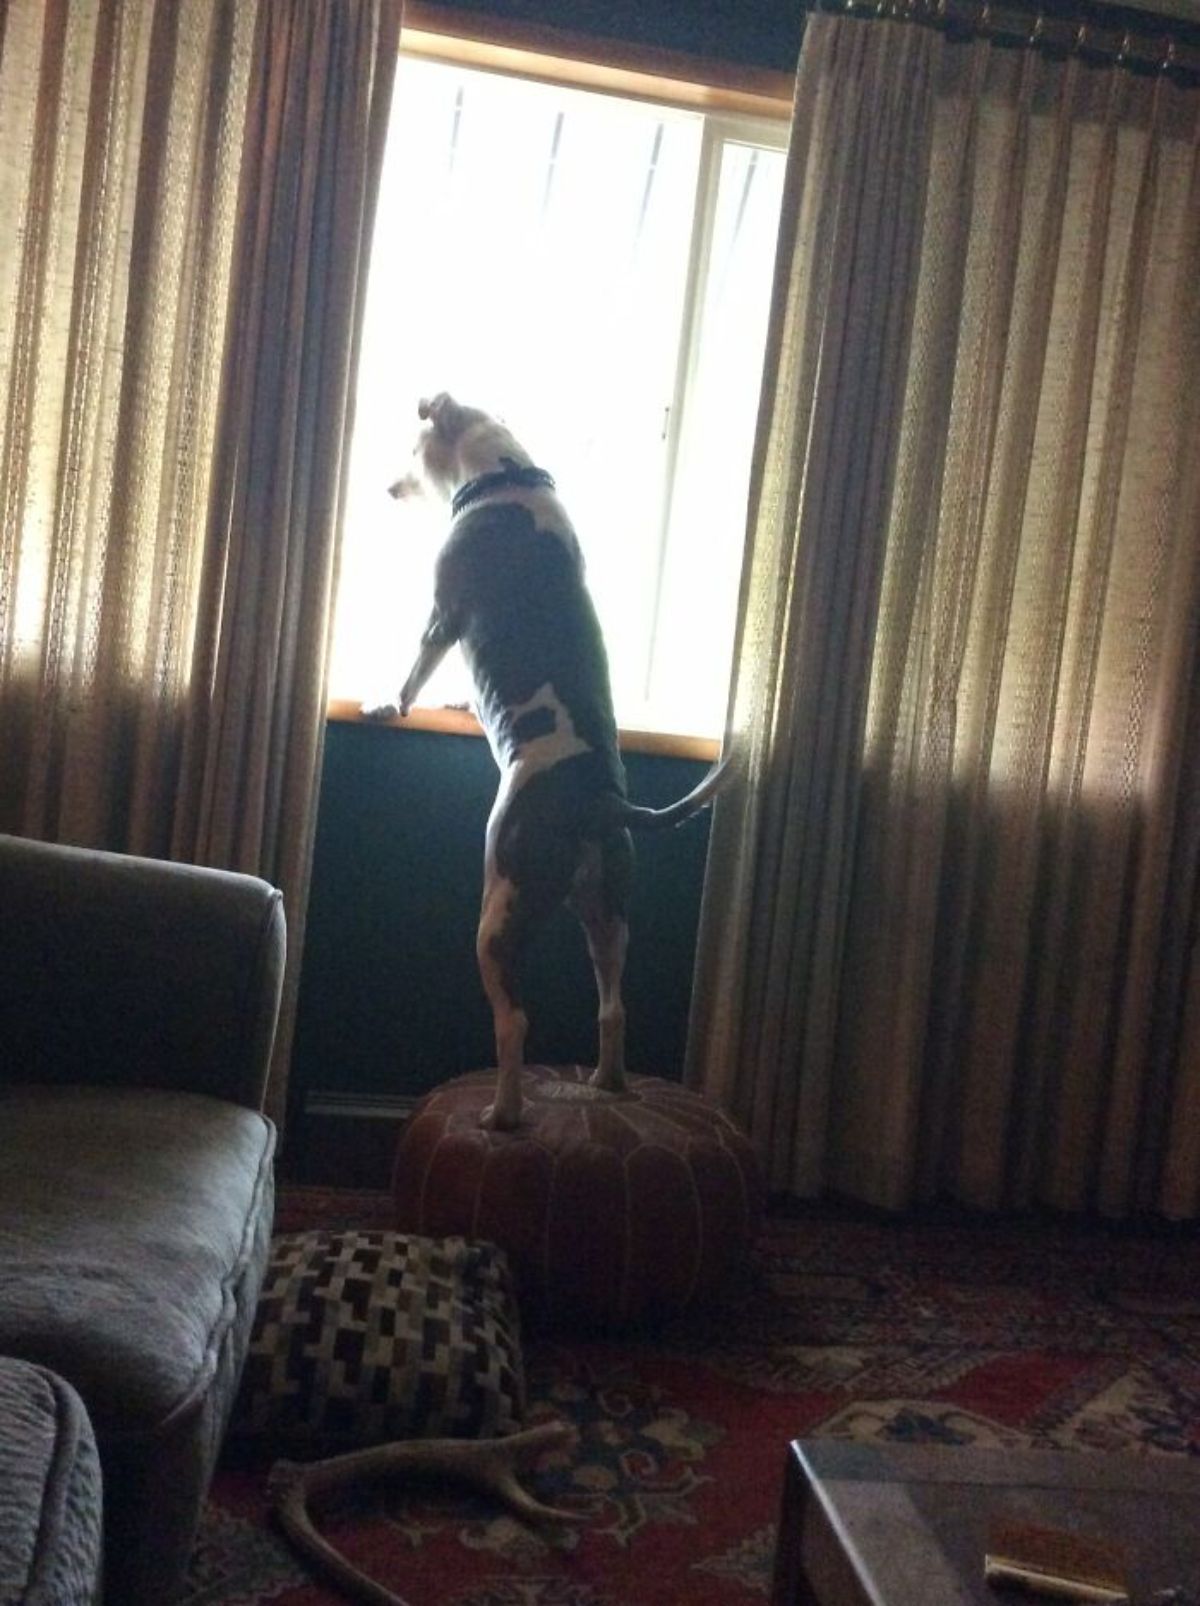 black and white dog standing on hind legs on a stool and looking out of a window